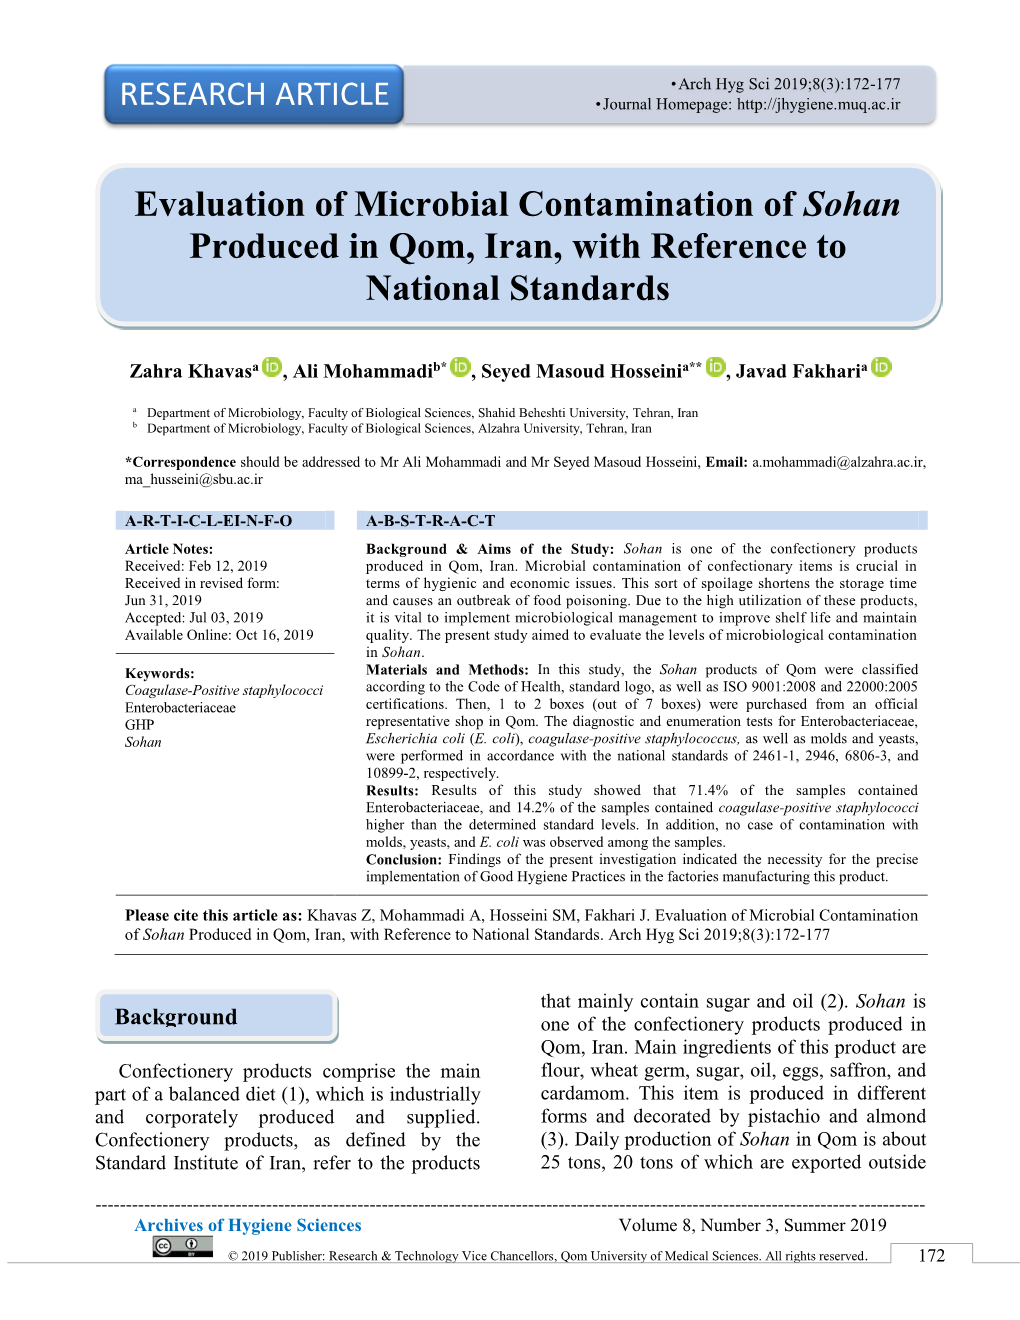 Evaluation of Microbial Contamination of Sohan Produced in Qom, Iran, with Reference to National Standards